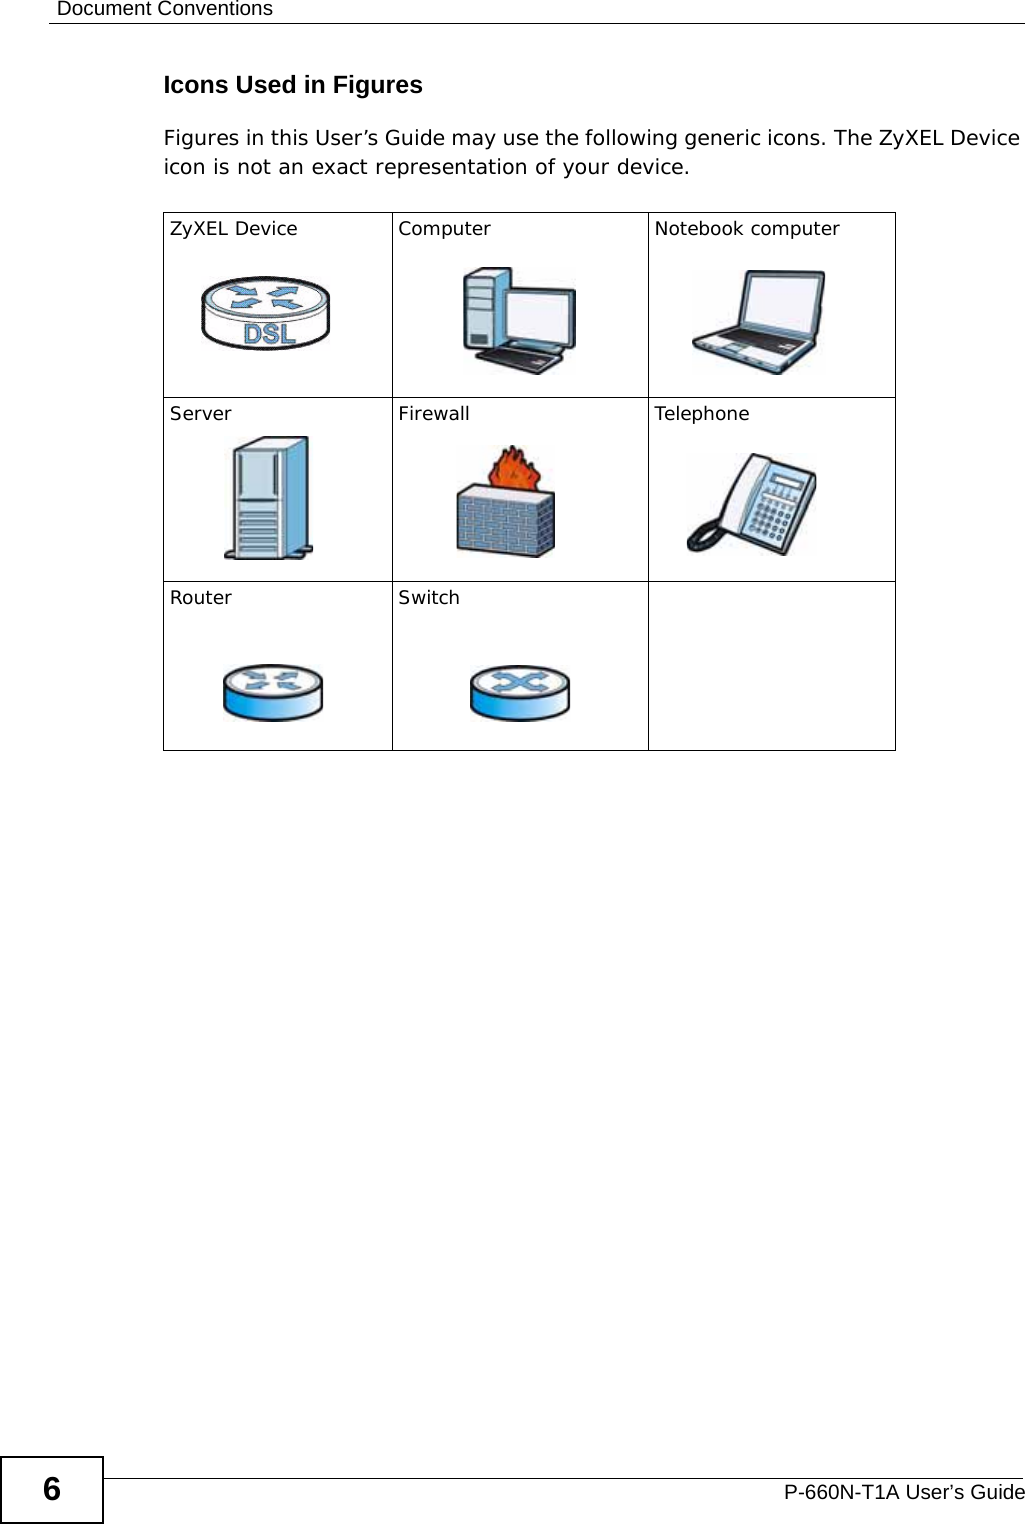 Document ConventionsP-660N-T1A User’s Guide6Icons Used in FiguresFigures in this User’s Guide may use the following generic icons. The ZyXEL Device icon is not an exact representation of your device.ZyXEL Device Computer Notebook computerServer Firewall TelephoneRouter Switch